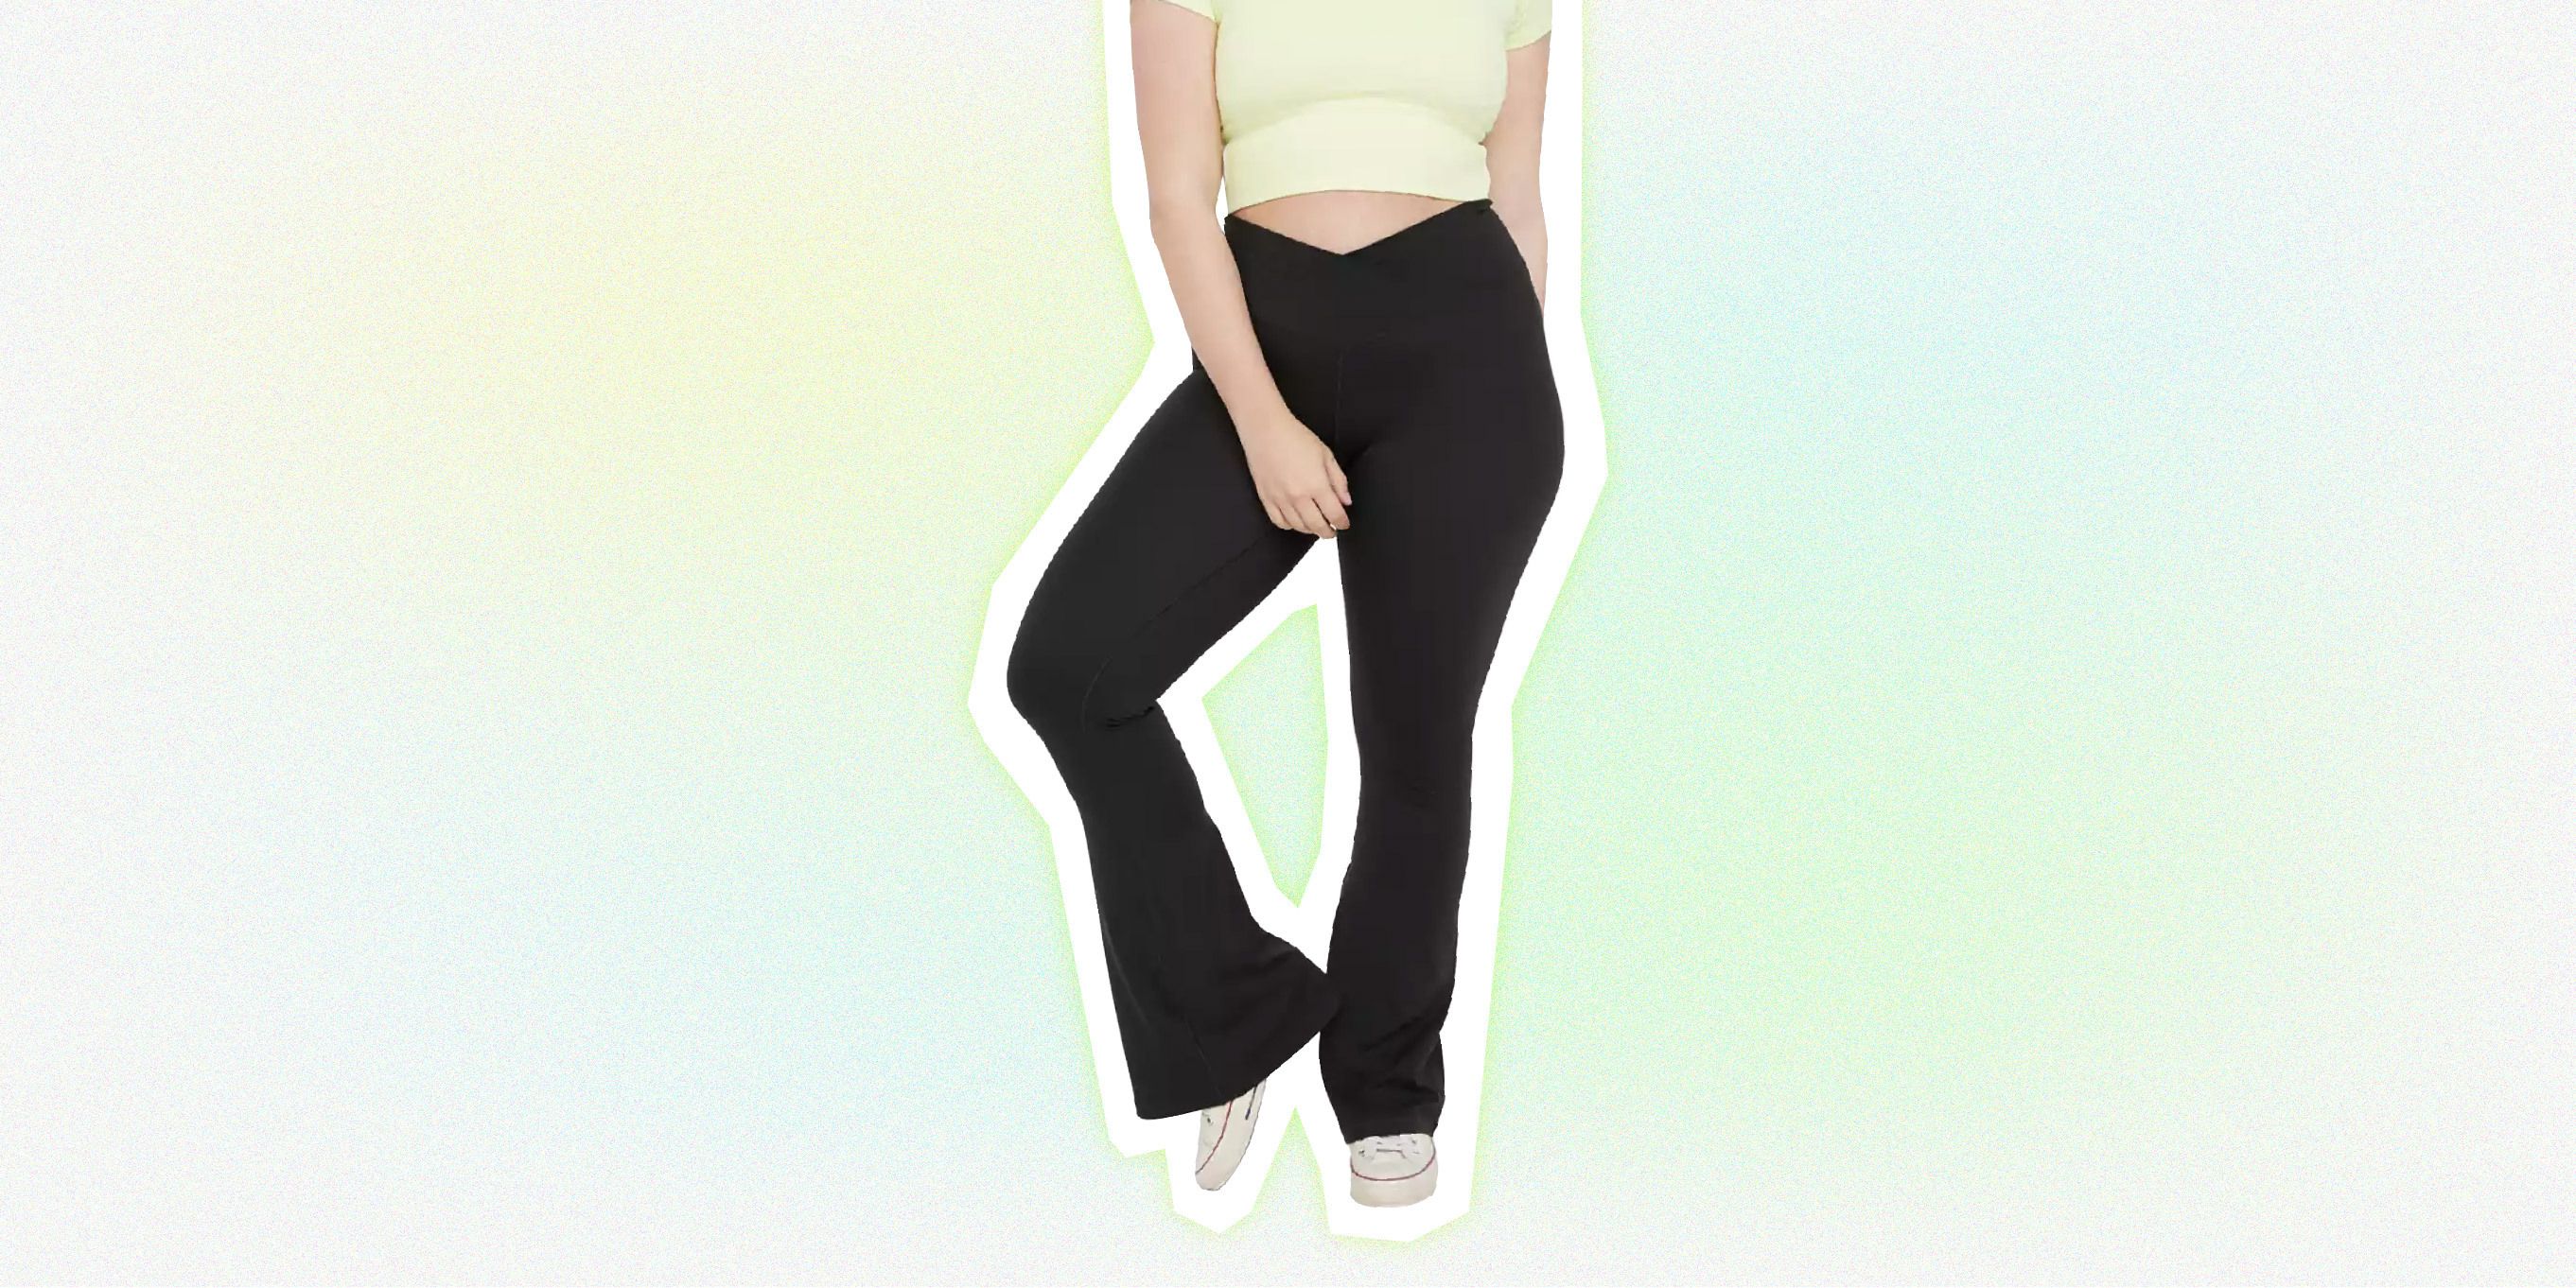 flared leggings outfit cute｜TikTok Search